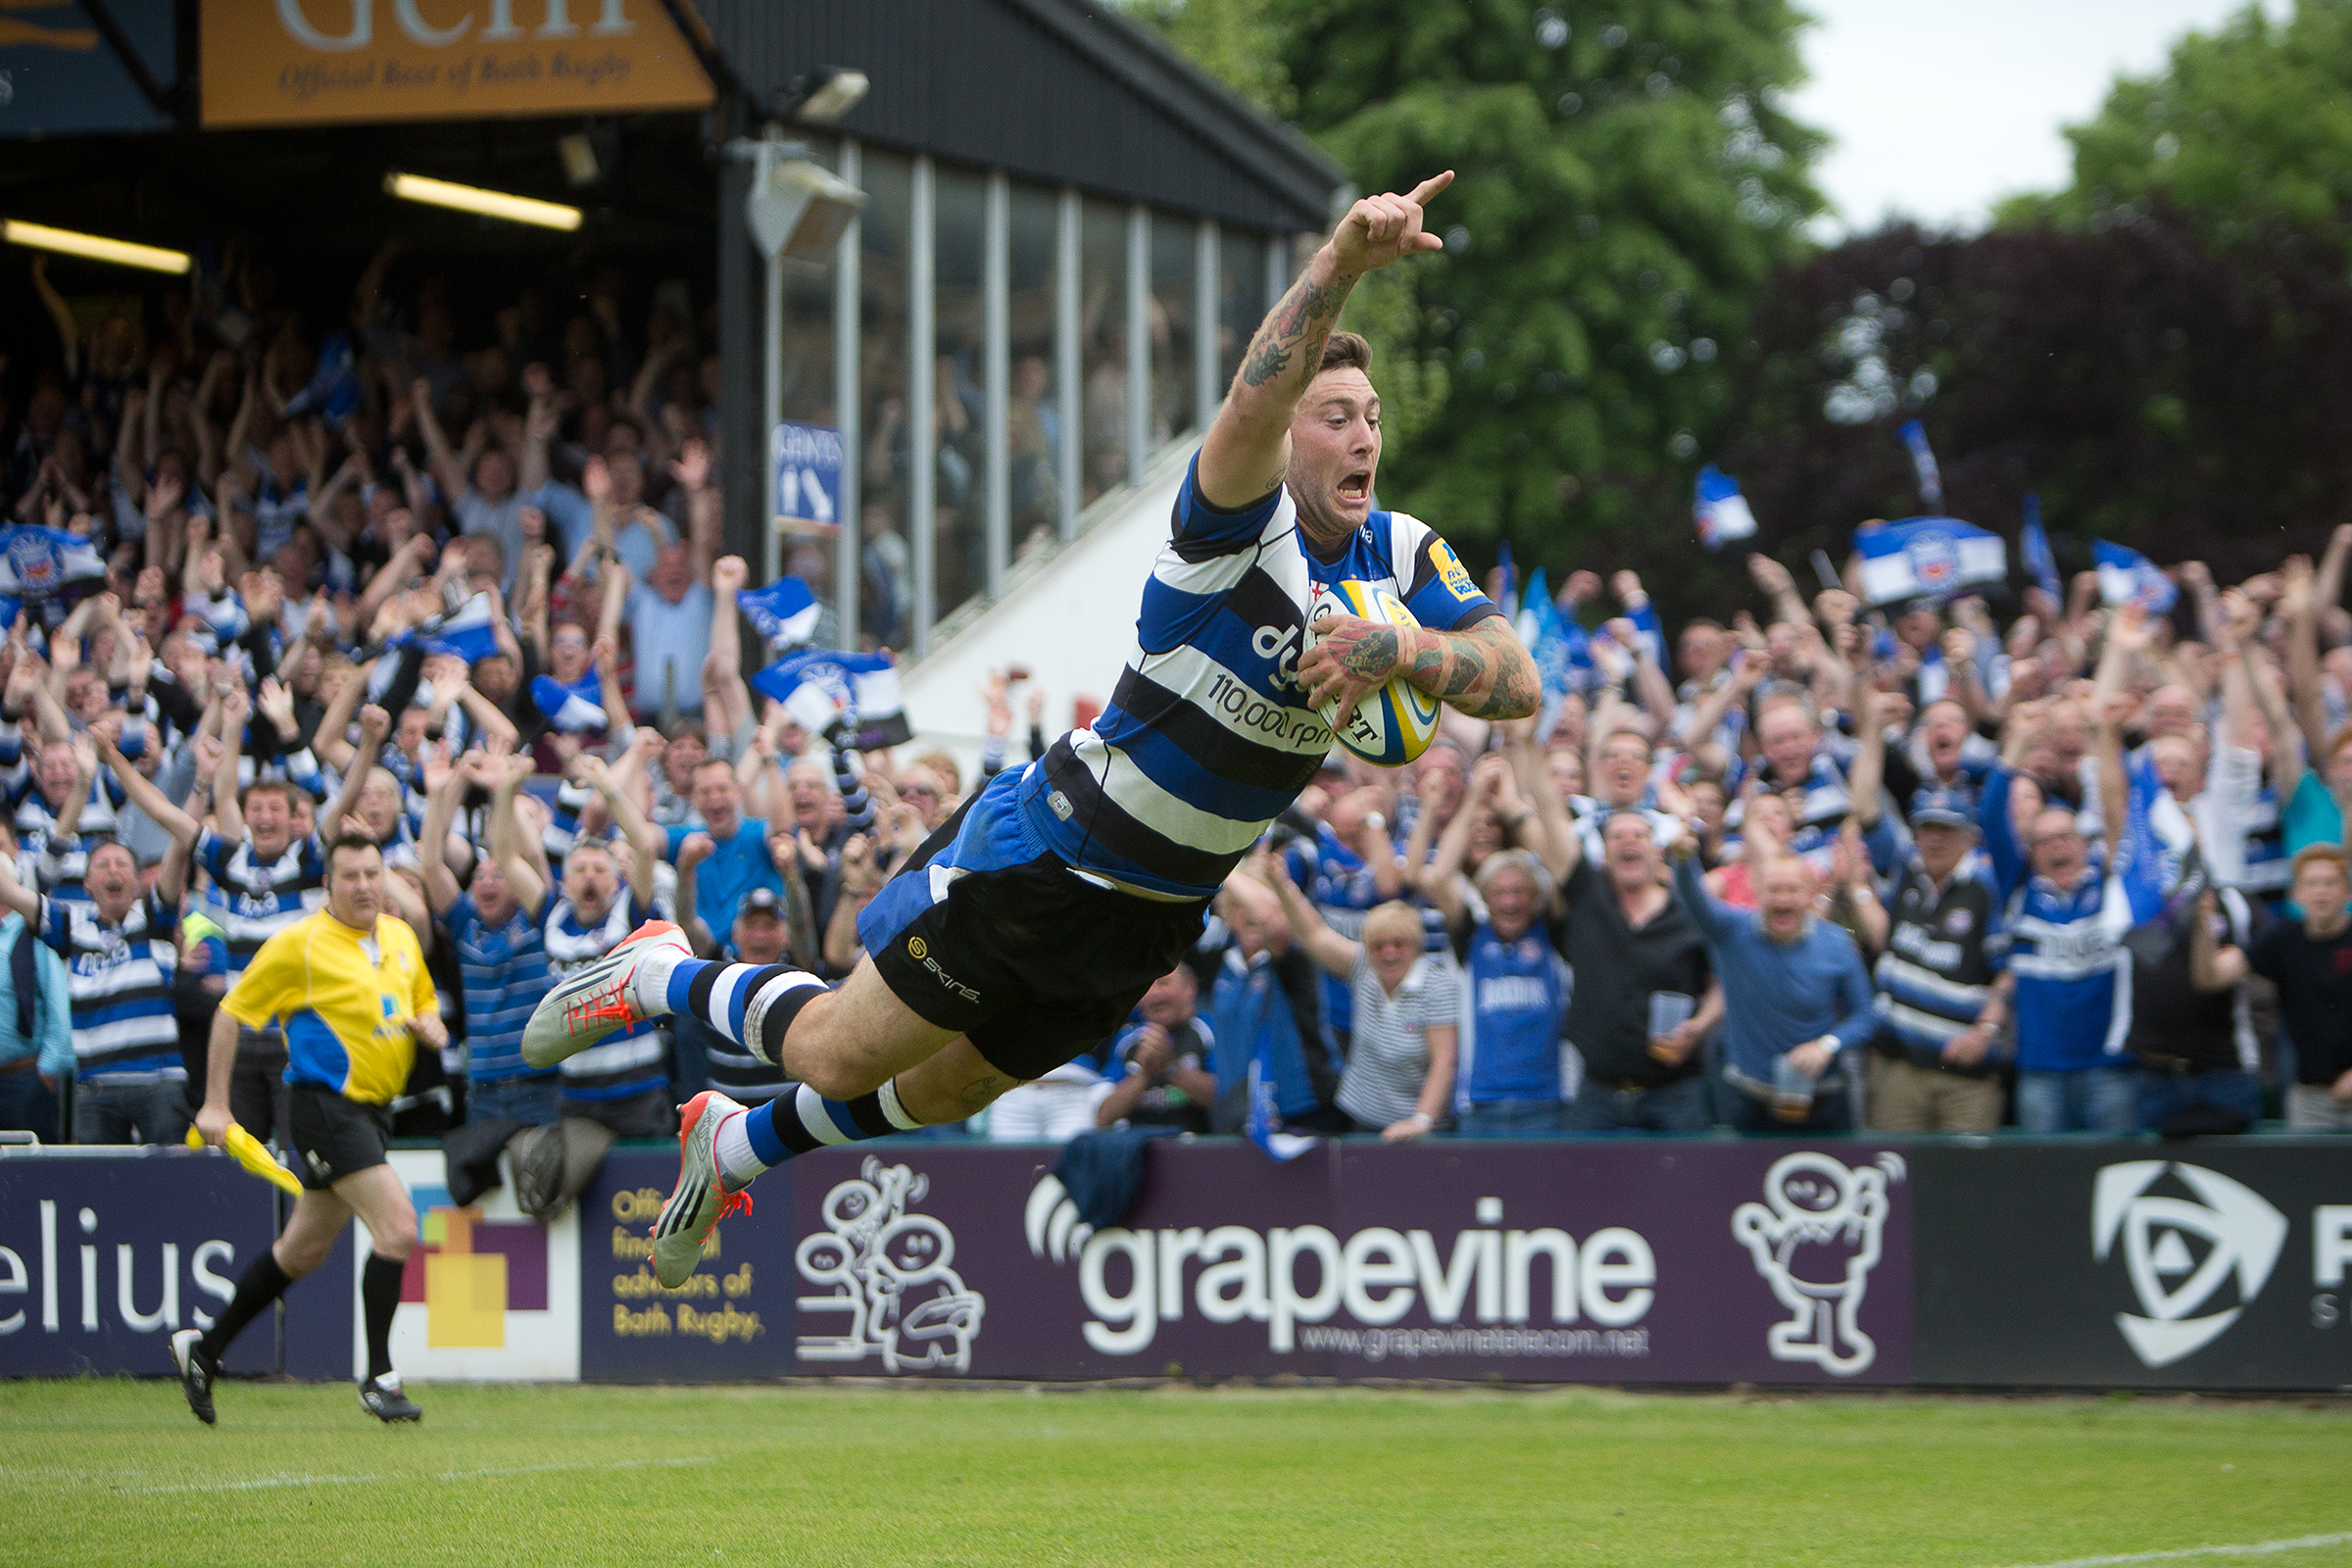 A Bath Rugby player photographed mid action with the Grapevine pitch side banner visible in the background.